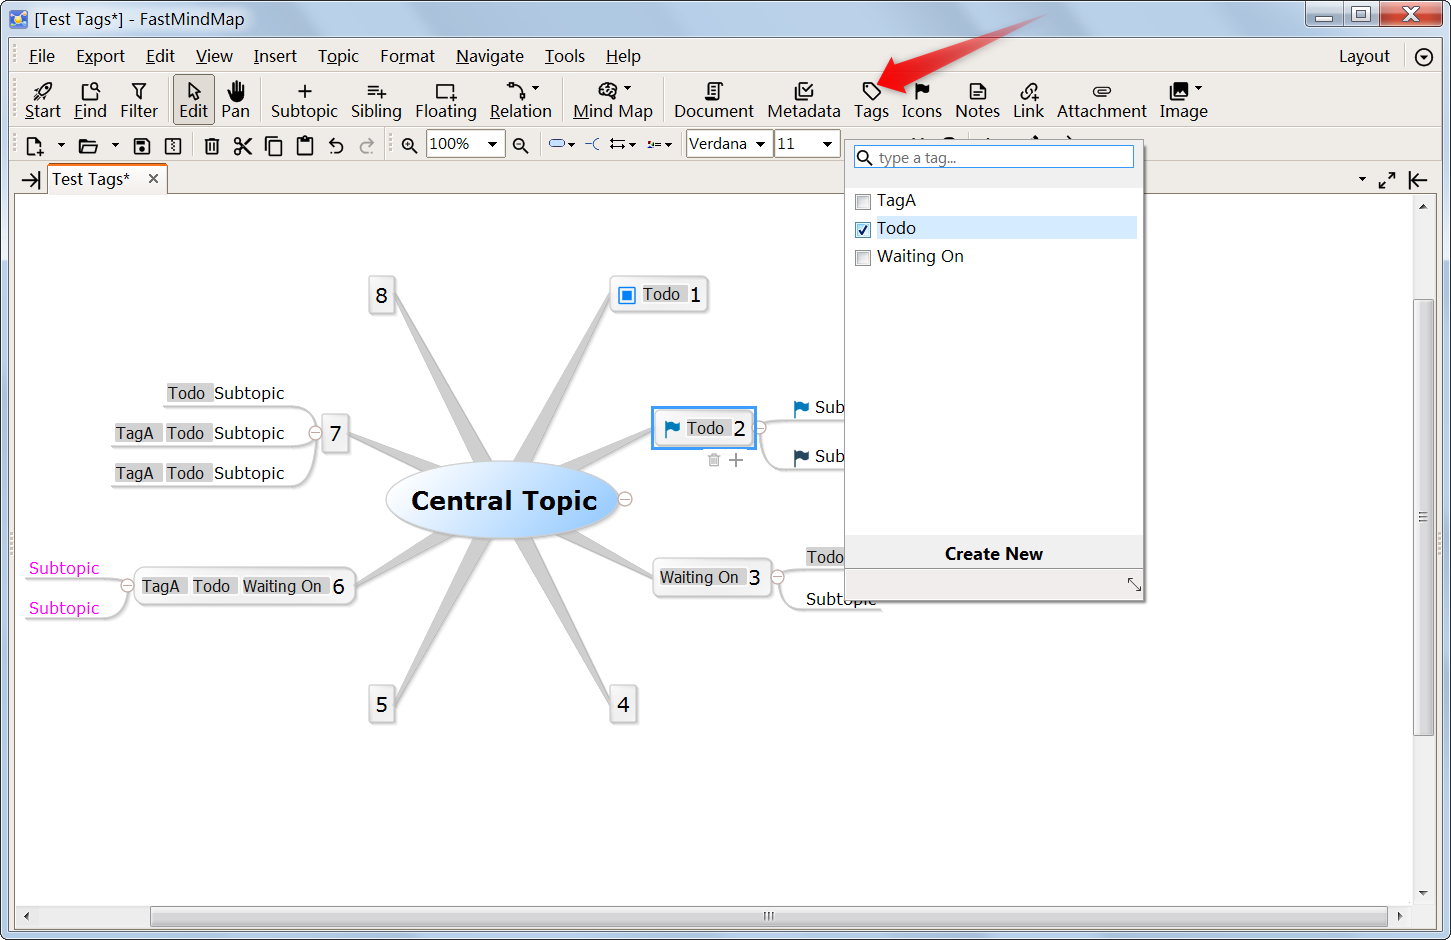 Attach text tags to topics in a mindmap/concept map